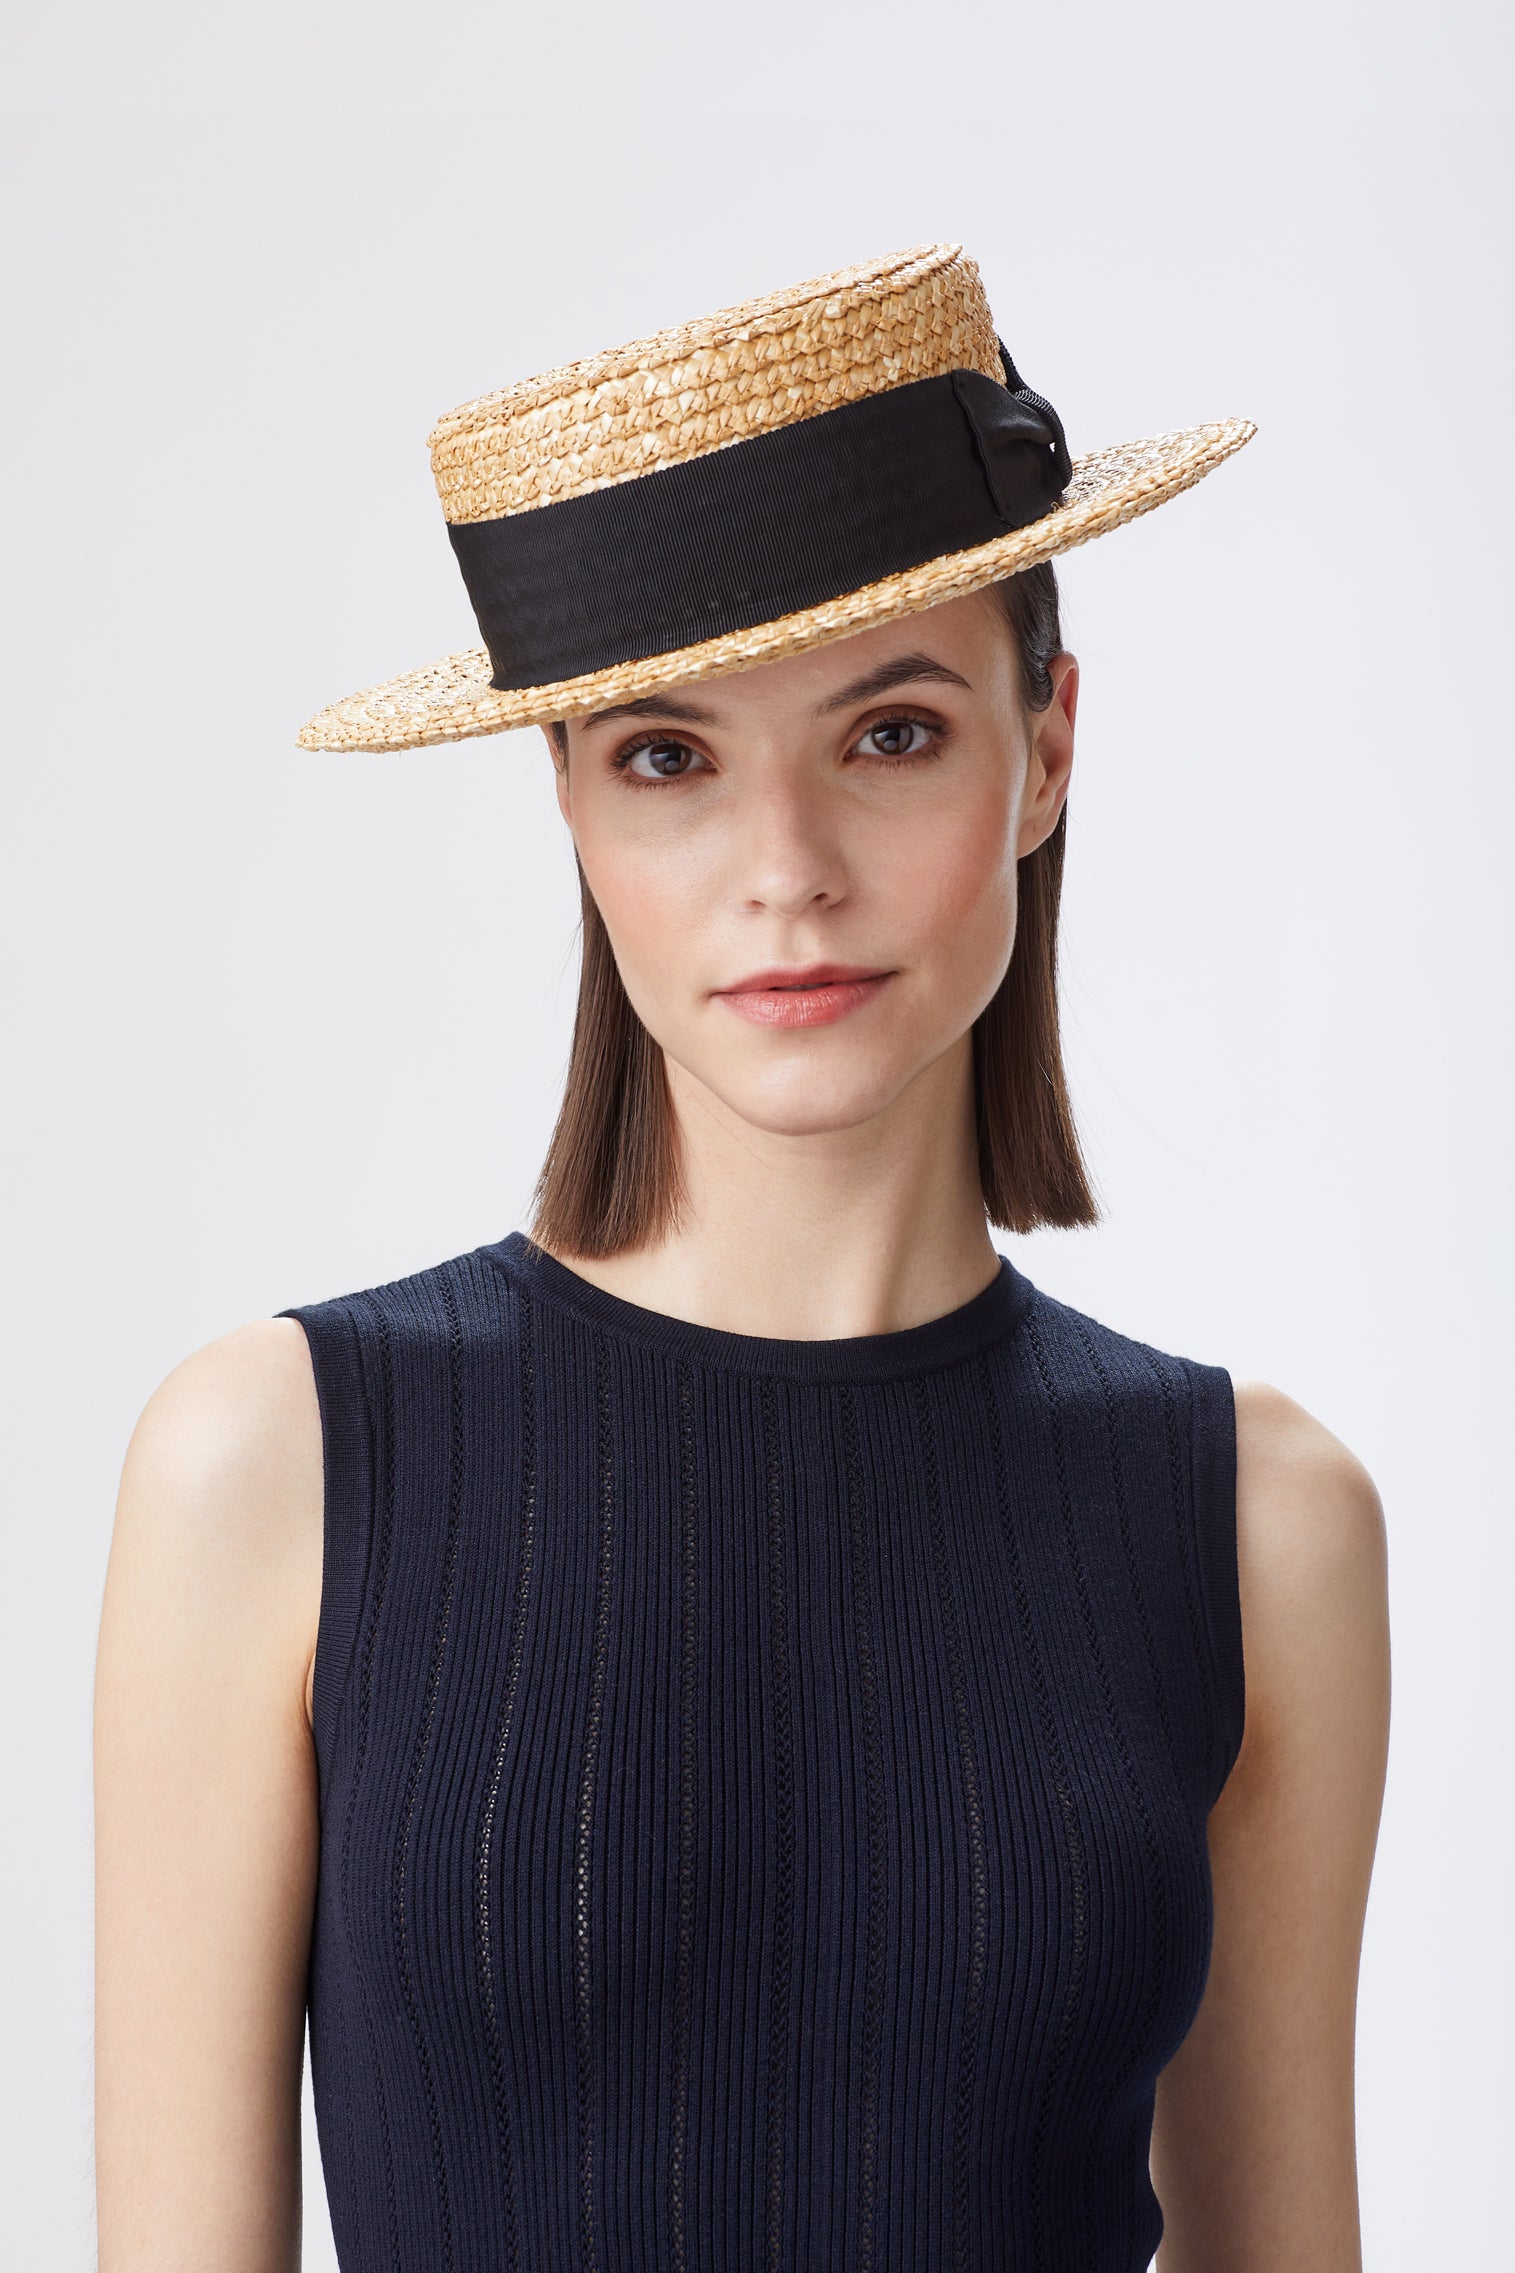 Classic Boater - Panamas, Straw and Sun Hats for Men - Lock & Co. Hatters London UK